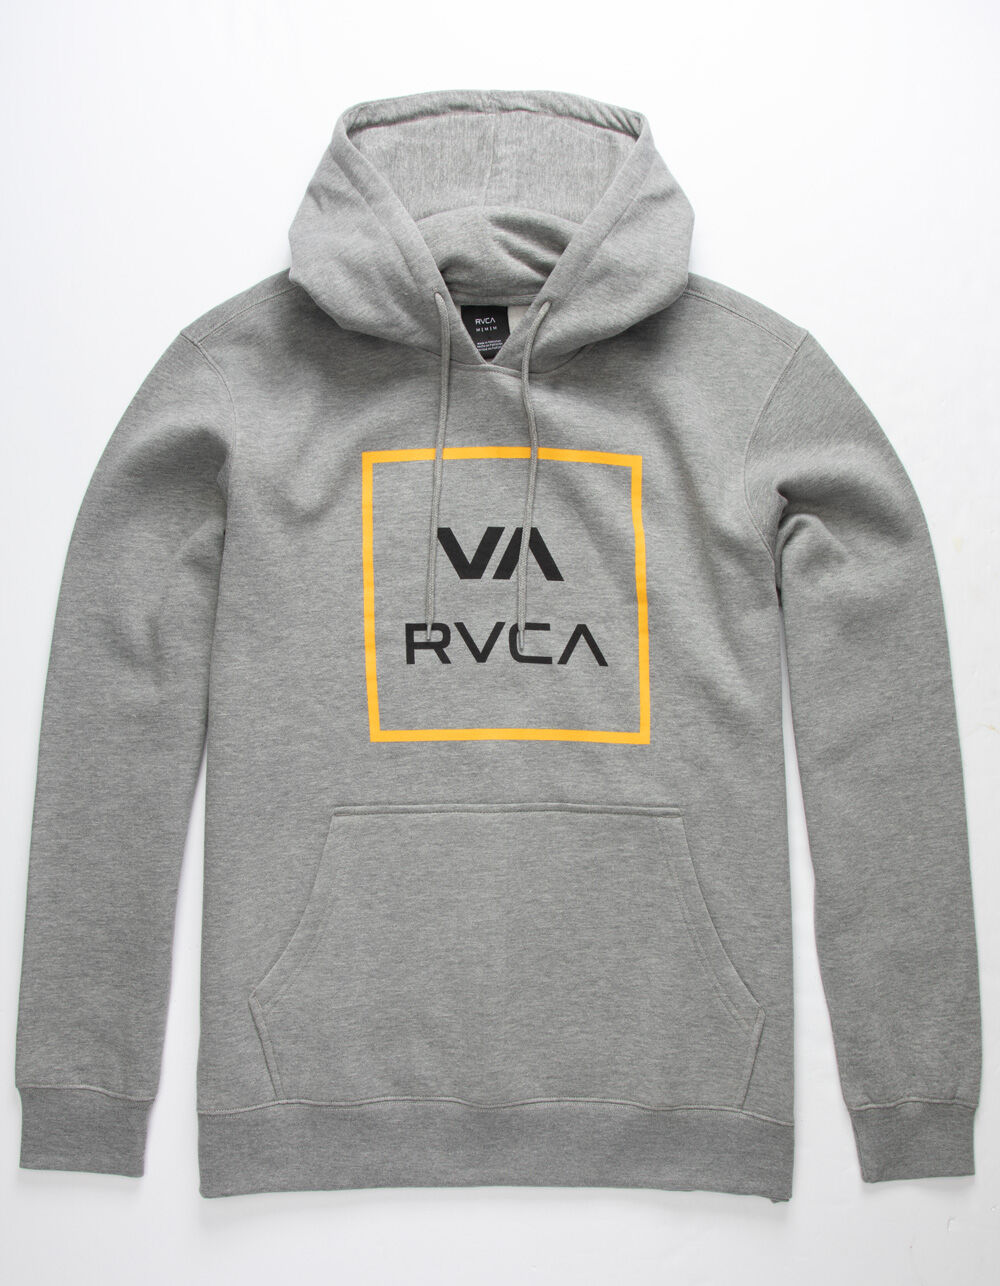 RVCA VA All The Way Mens Hoodie image number 0